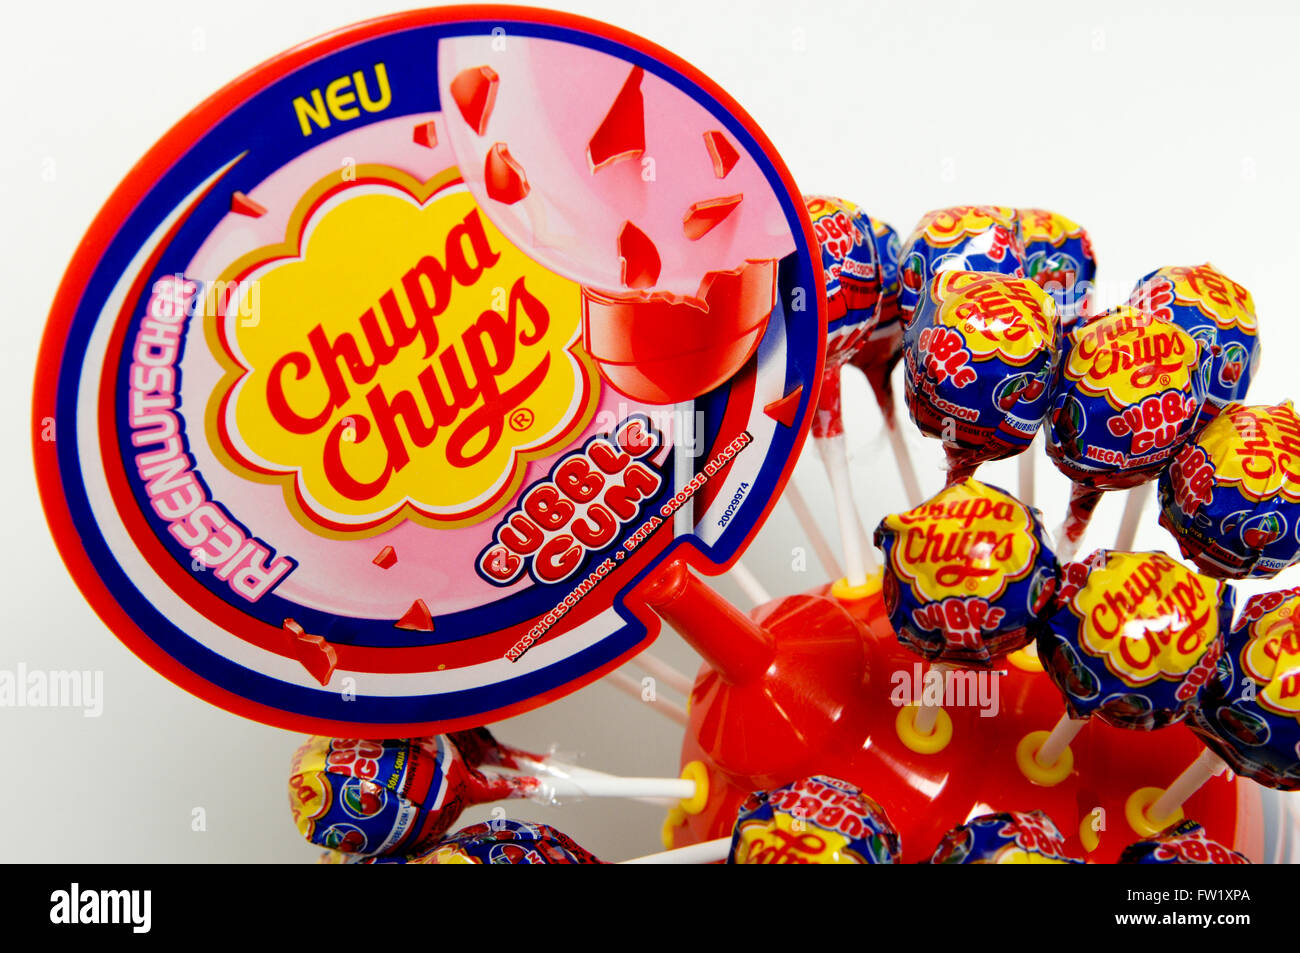 Chupa Chups is a popular Spanish brand of lollipop and other confectionery sold in over 150 countries around the world. Stock Photo